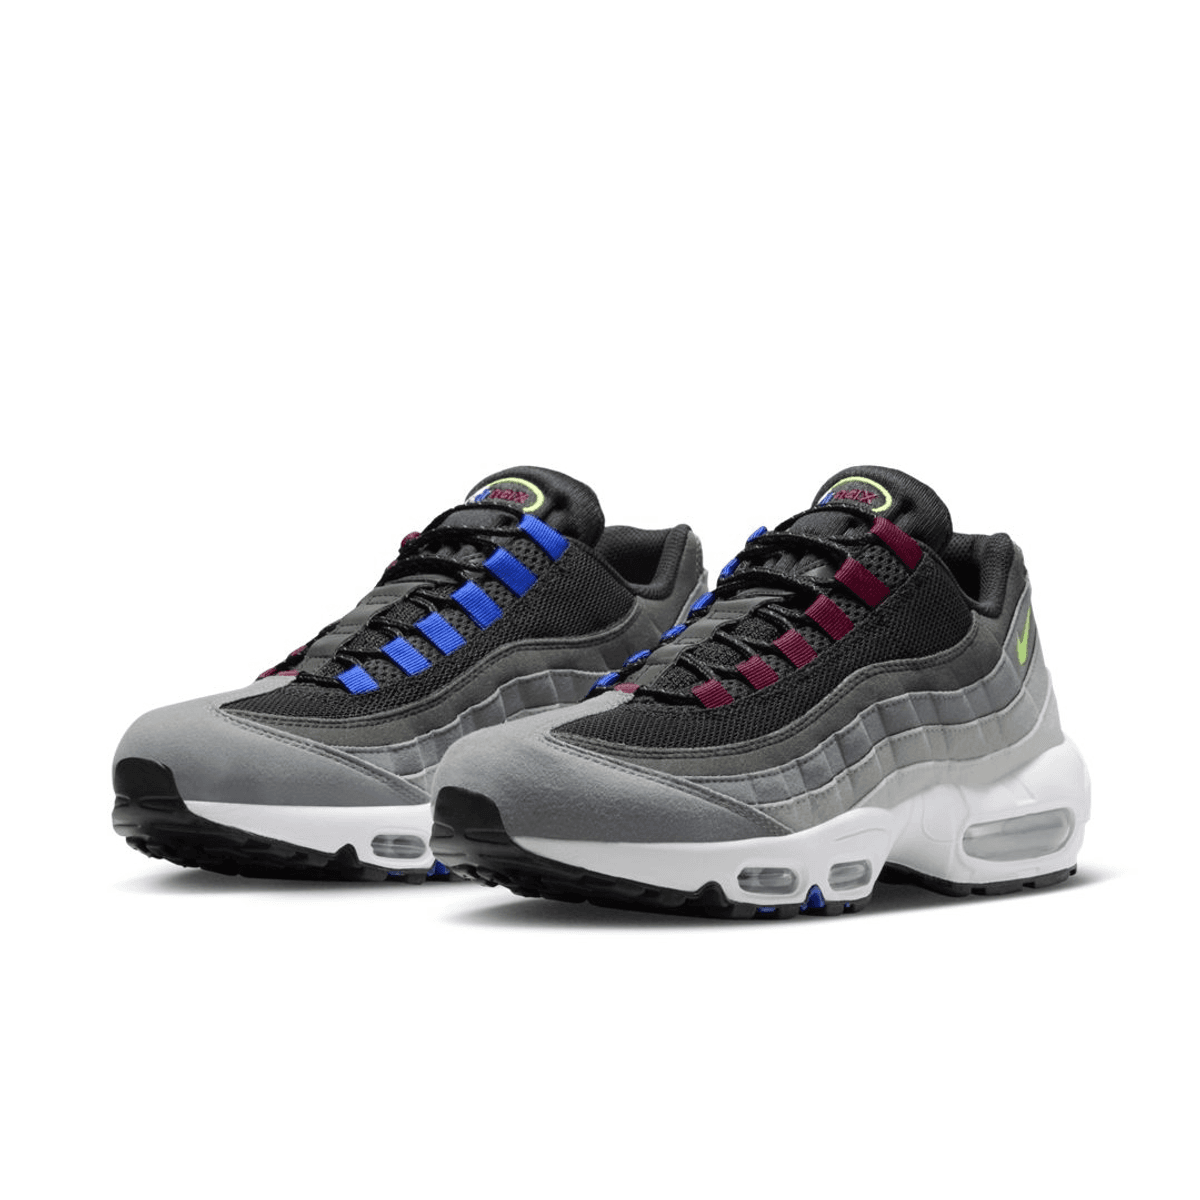 Air Max 95 Greedy Brings Uses Mash-Up For Newest Release